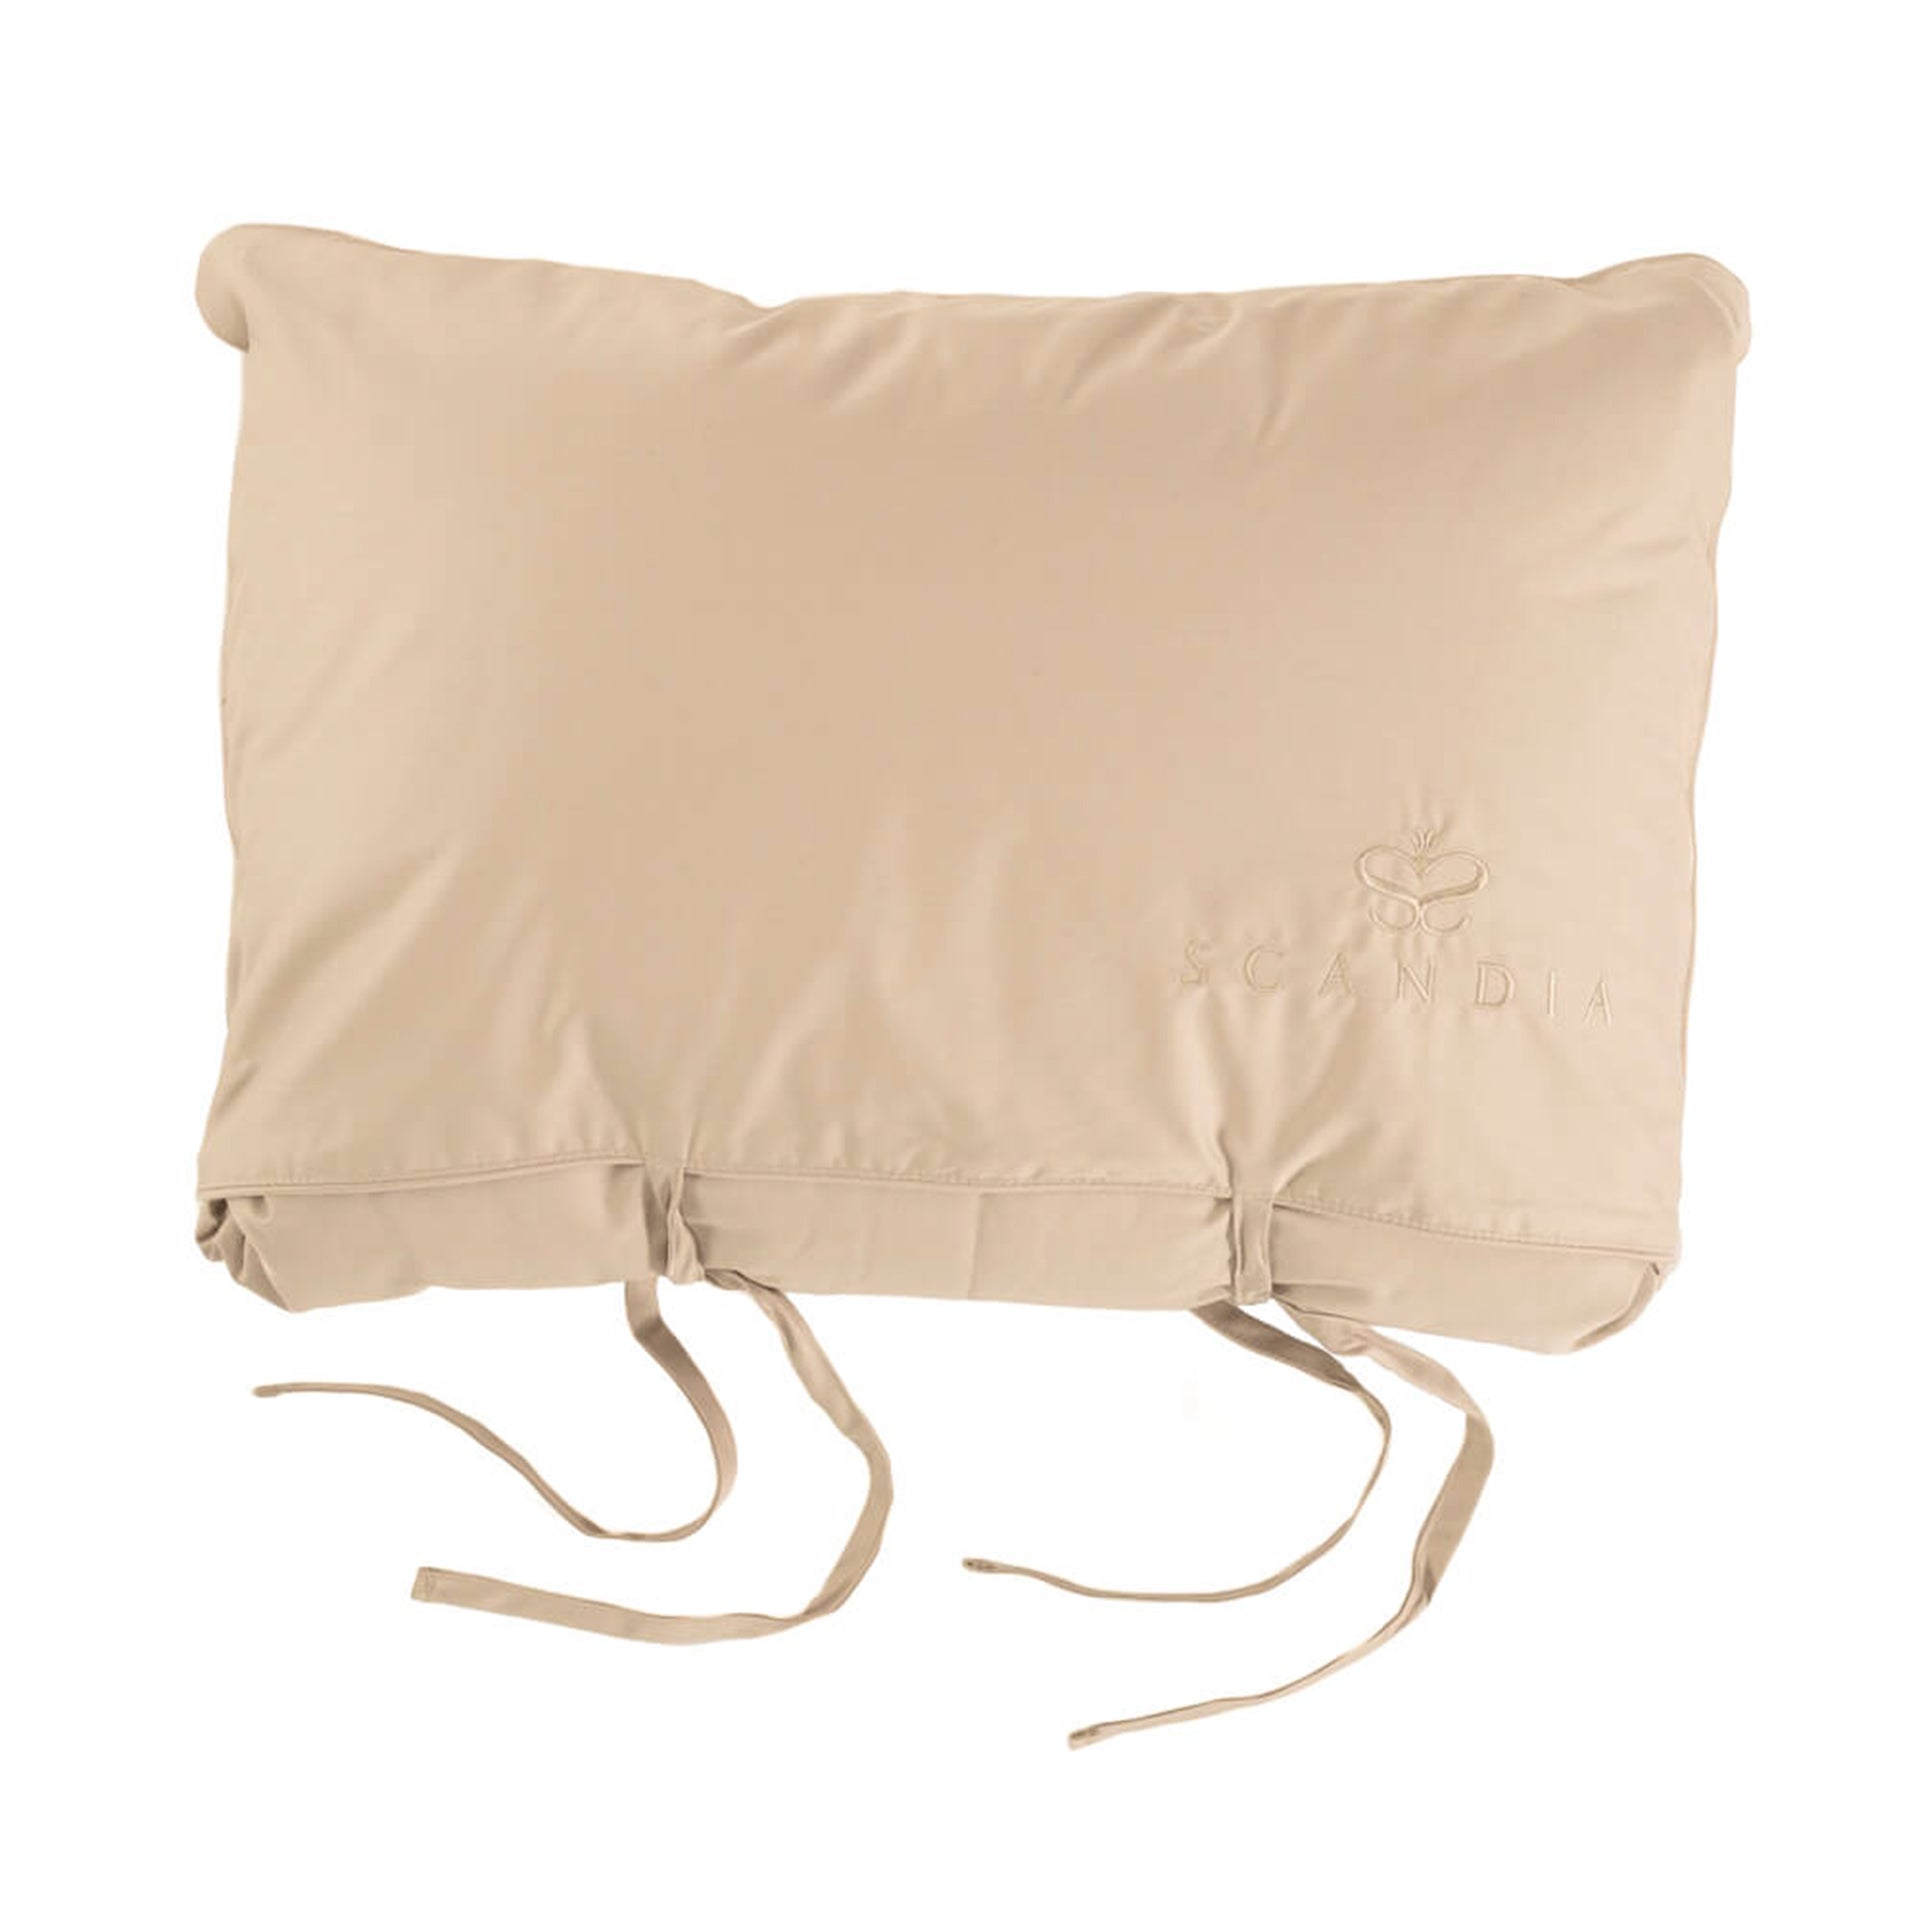 scandia home down travel attache covered in a sateen cotton in color cafe the perfect travel companion, 